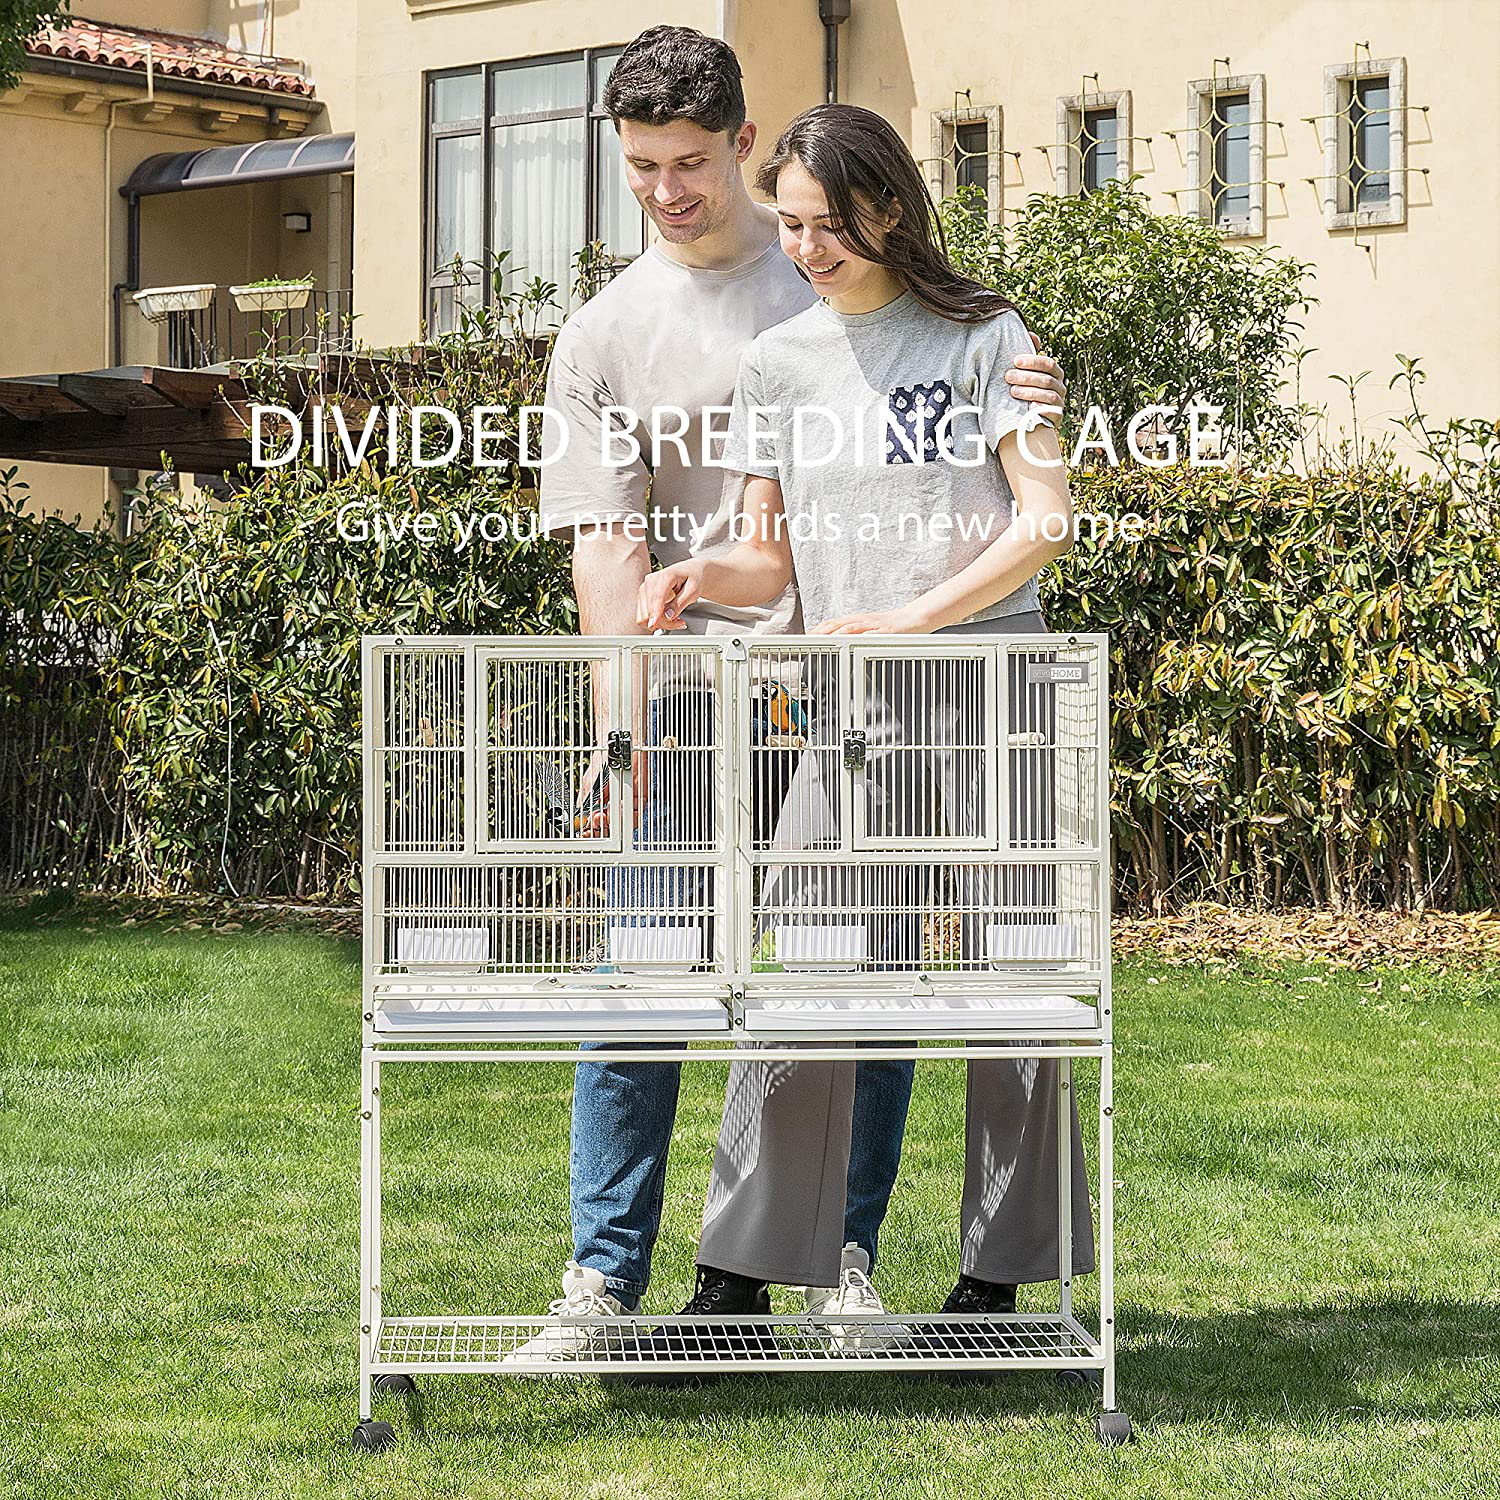 VIVOHOME 41.5 Inch Stackable Divided Breeding Iron Bird Cage Parakeet House with Rolling Stand for Canaries Cockatiels Lovebirds Finches Budgies Small Parrots Animals & Pet Supplies > Pet Supplies > Bird Supplies > Bird Cage Accessories VIVOHOME   